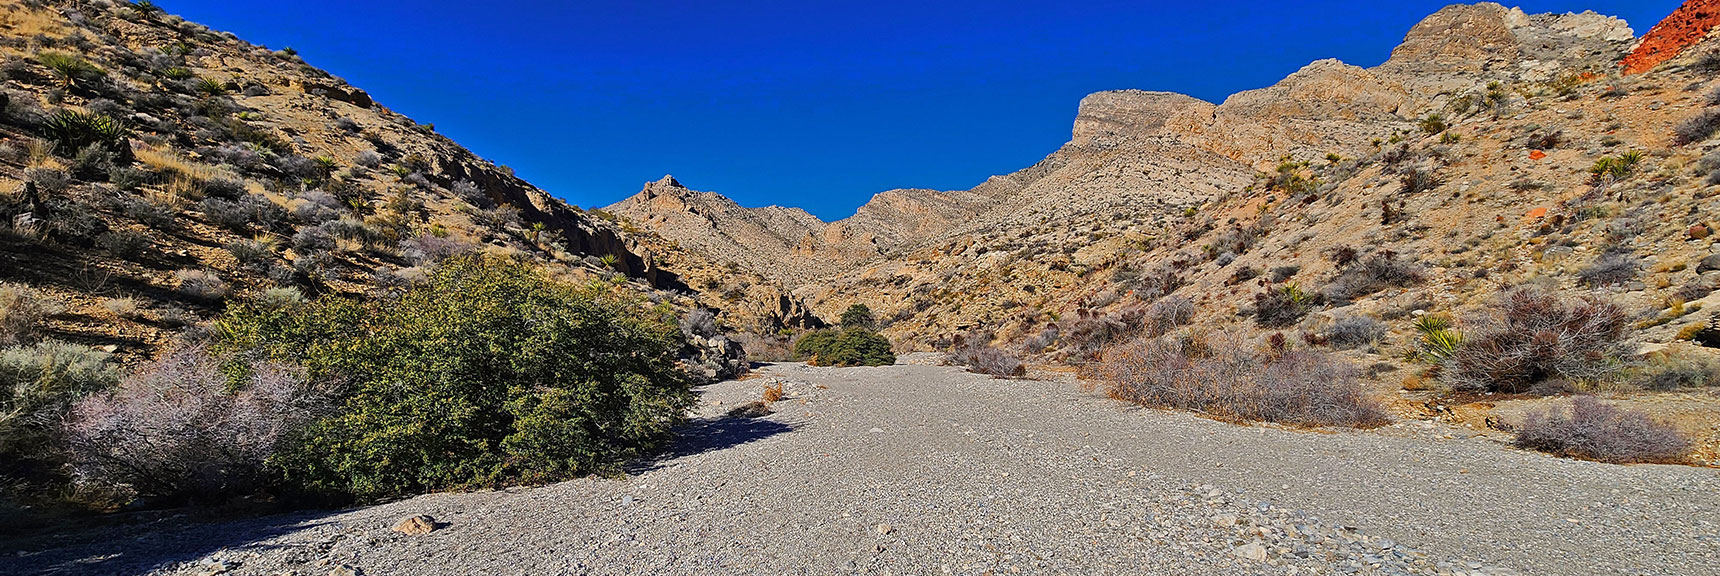 Rattlesnake Gulch Will Be Just Before Tall Hill Ahead on Left | Pink Goblin Loop | Calico Basin, Nevada